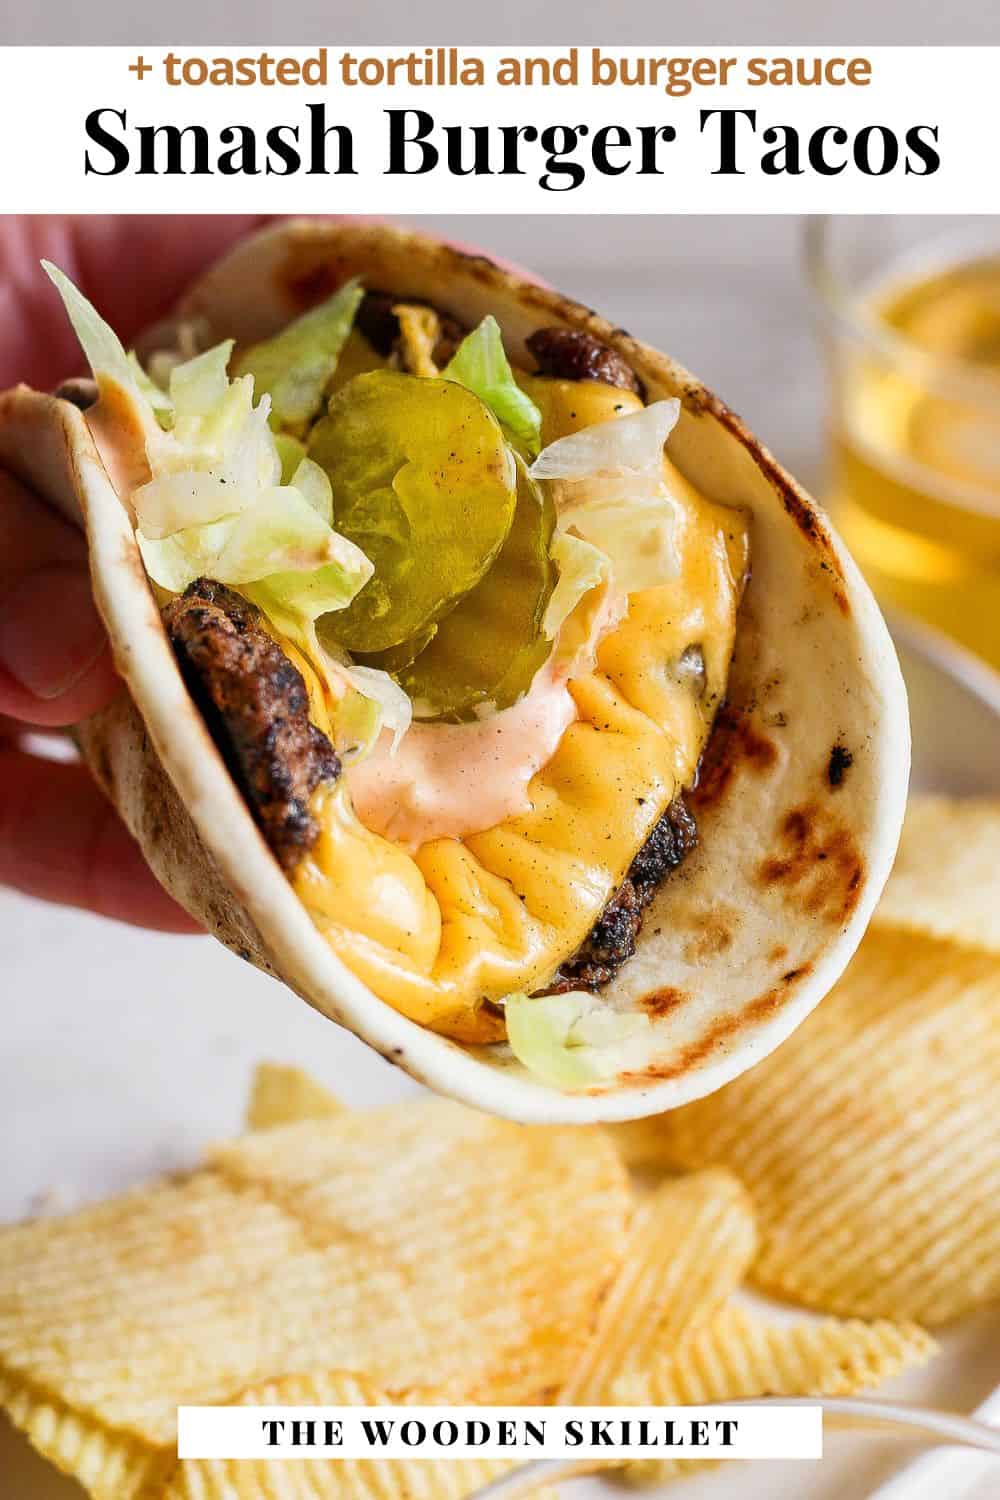 The smash burger taco being held like a taco above a plate of potato chips. Pinterest image title reads, "smash burger tacos + toasted tortilla and burger sauce"